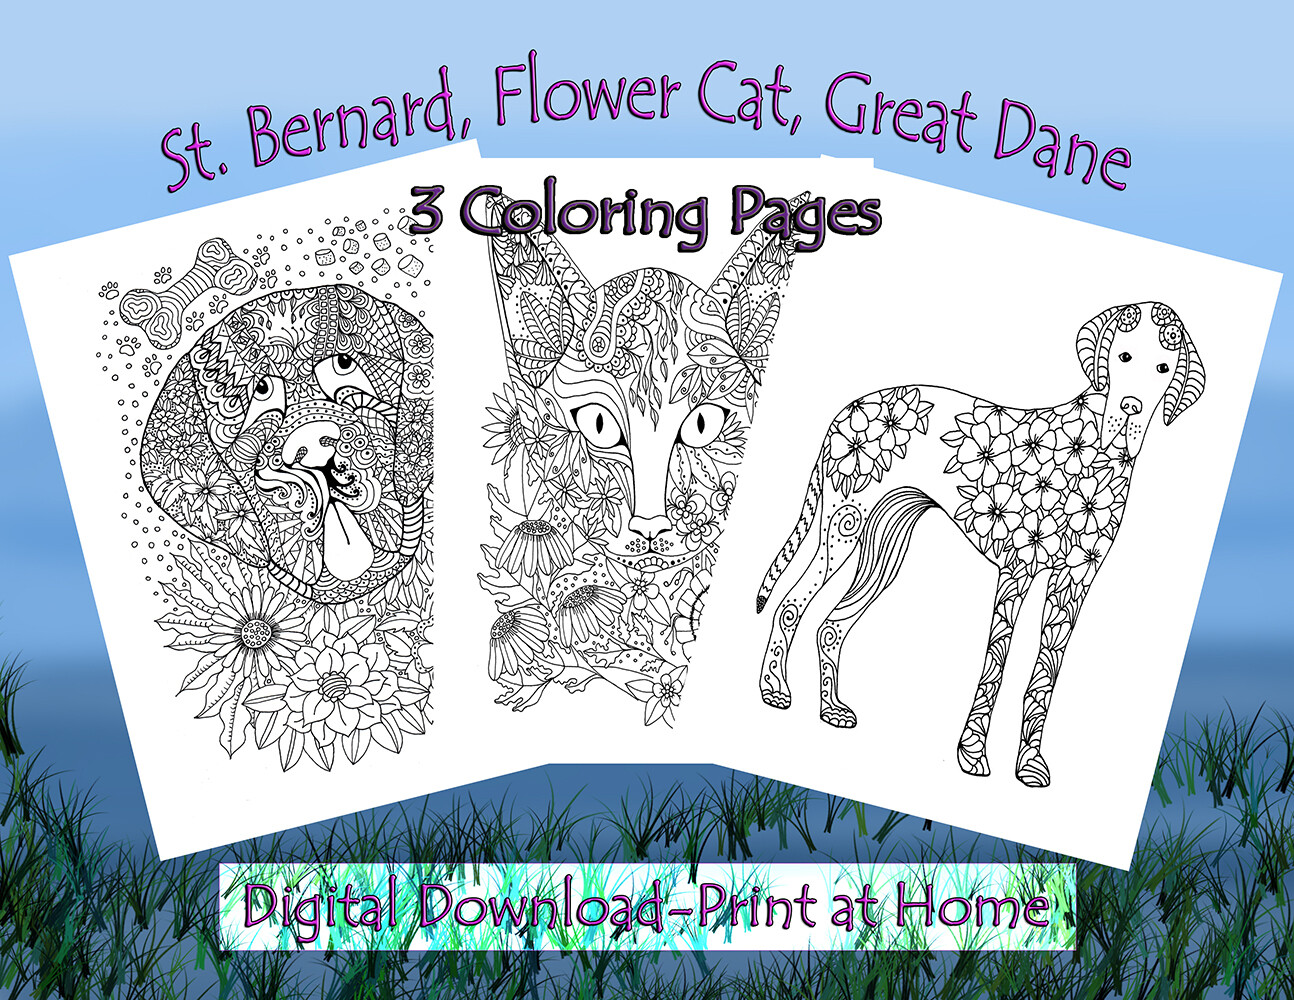 Dogs | Cat | Flowers | 3 Coloring Page Bundle | Printable Digital Downloads | Original Coloring Pages for Adults and Kids